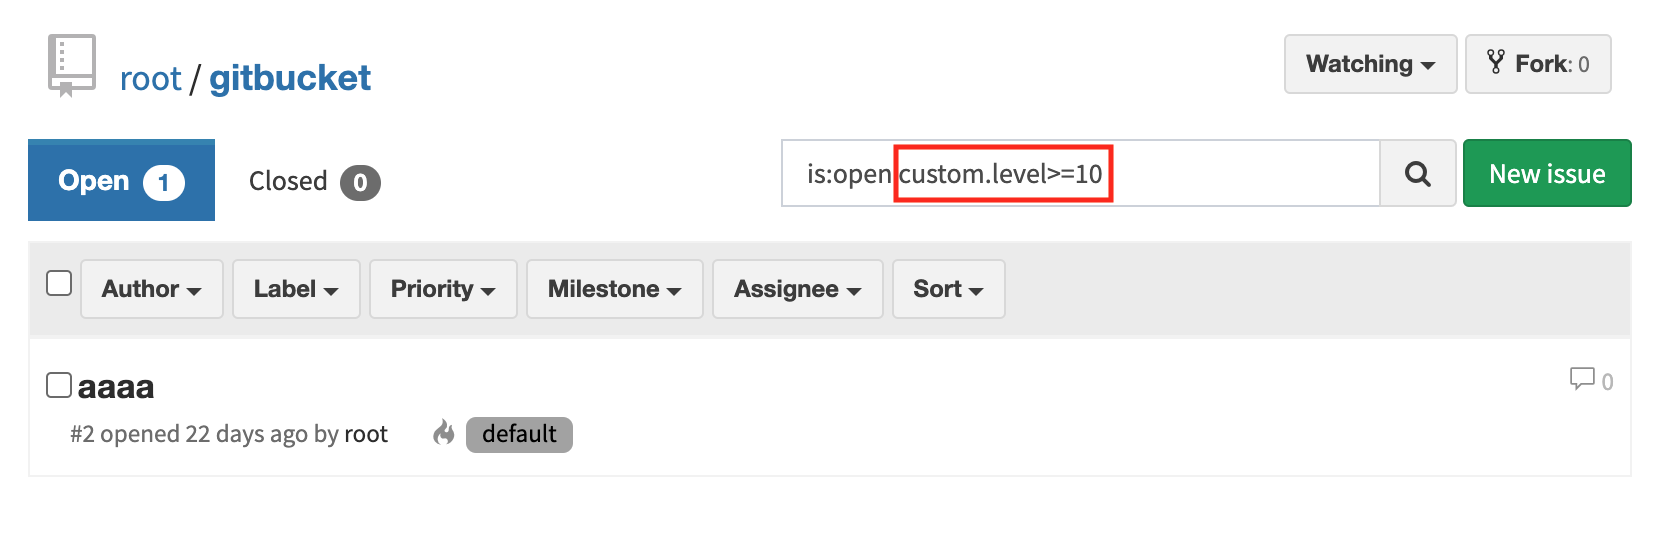 Search issues / pull requests by custom fields